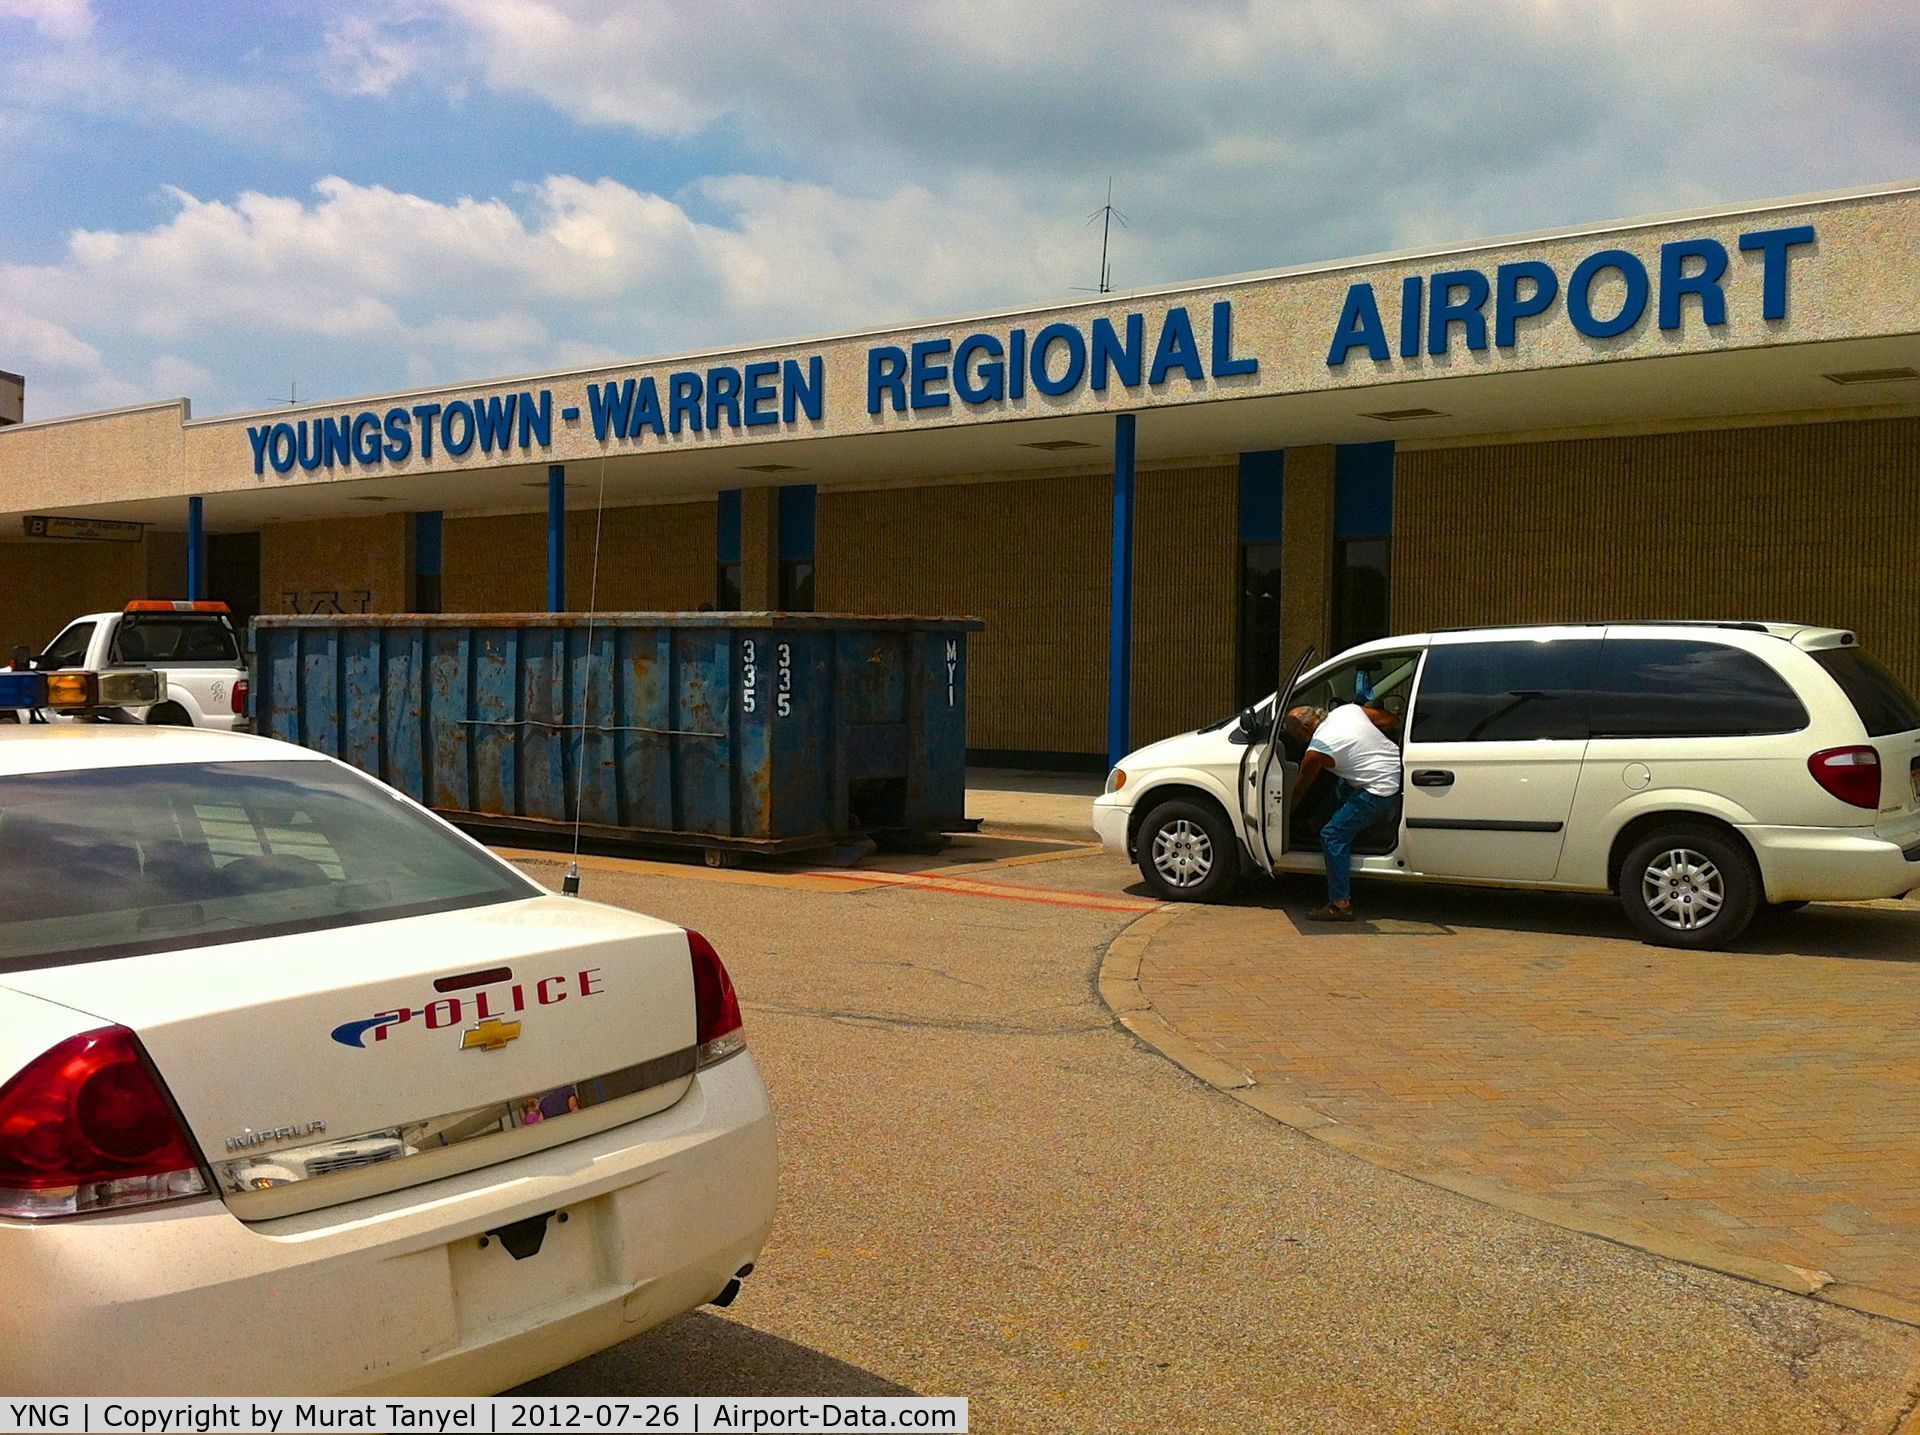 Youngstown-warren Regional Airport (YNG) - Entrance to the terminal building